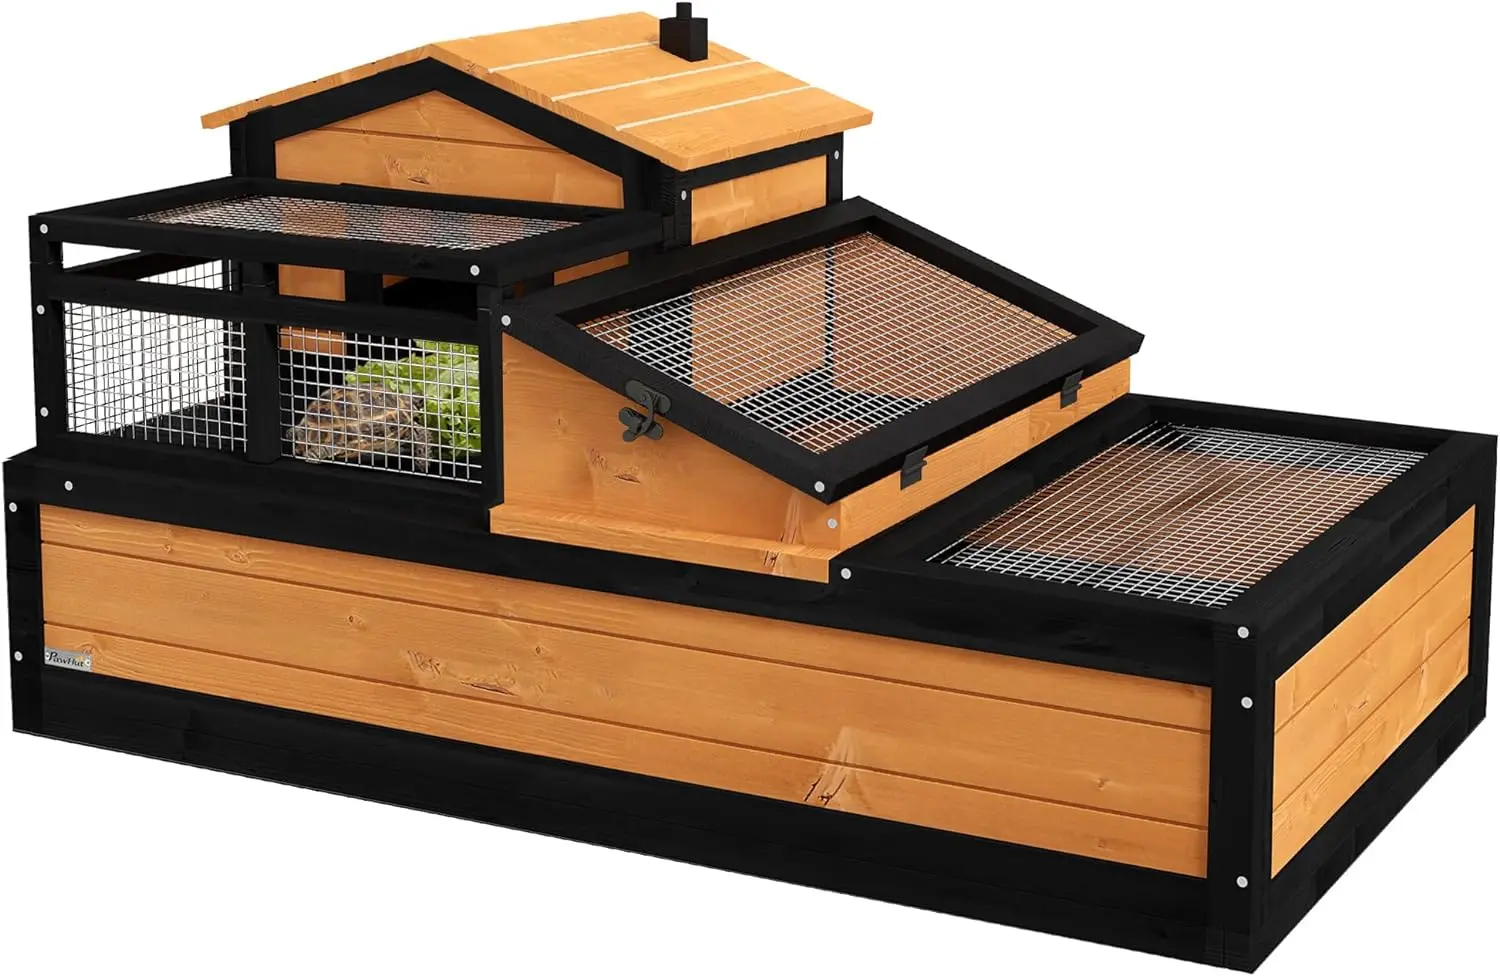 

3-Room Tortoise House Habitat with Balcony & Stories, Indoor/Outdoor Wooden Tortoise Enclosure with Ladder,Large Reptile Cage